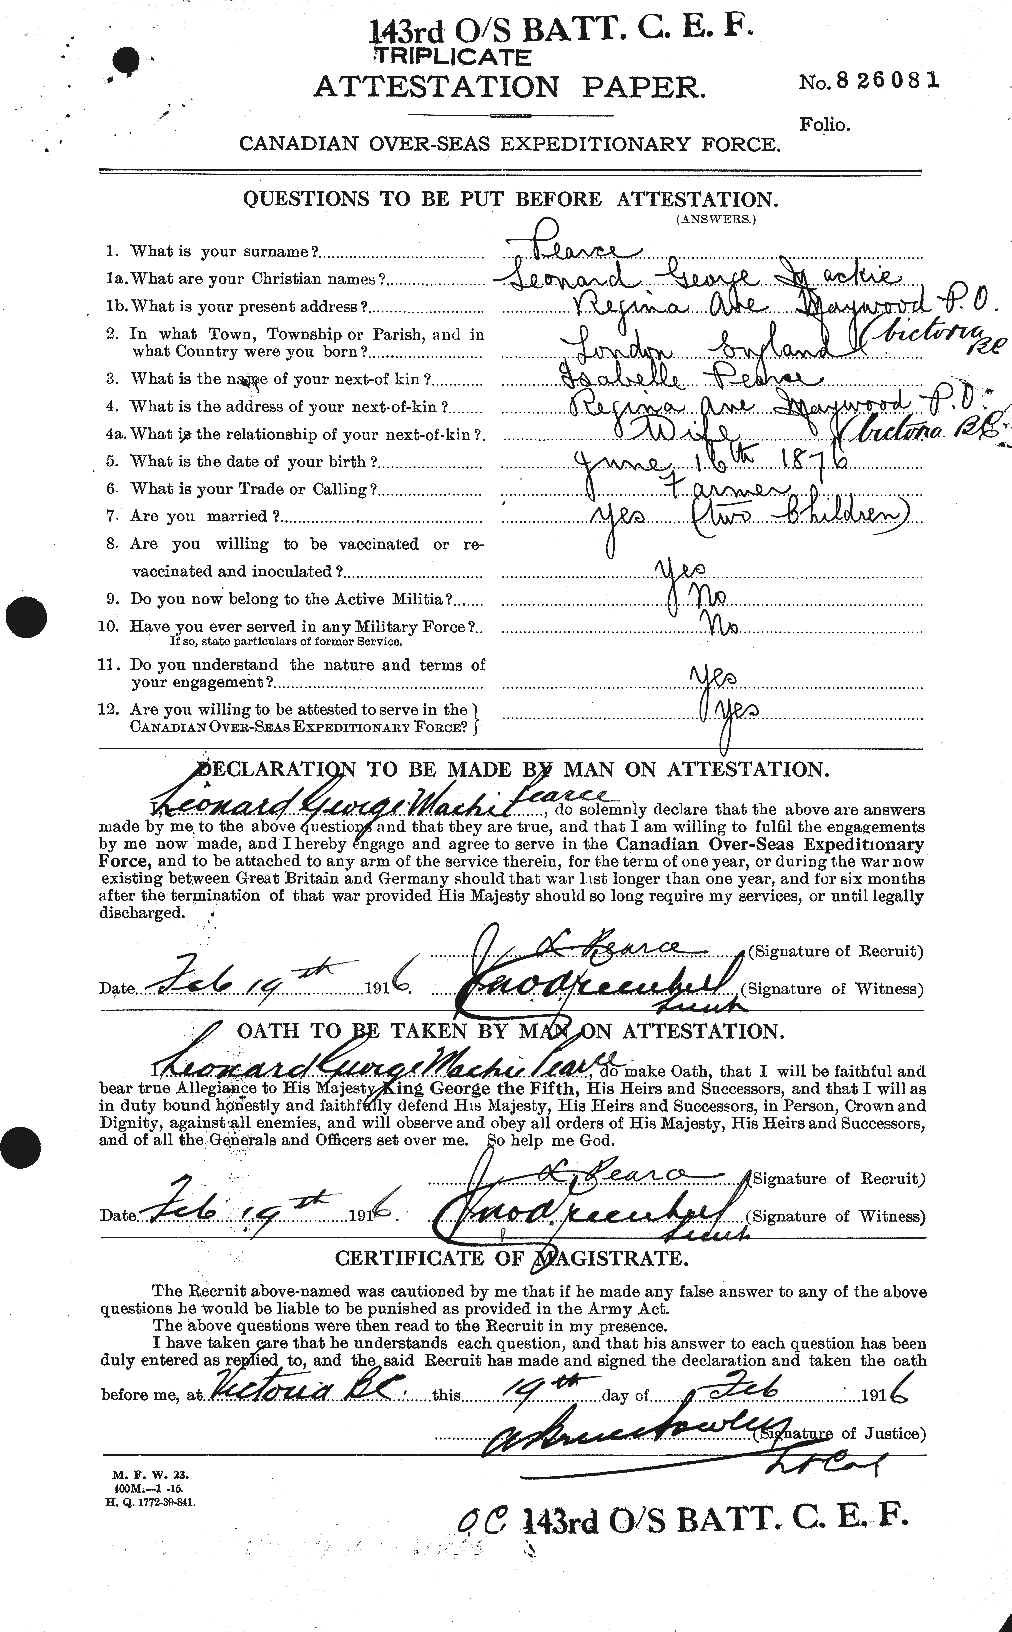 Personnel Records of the First World War - CEF 570708a